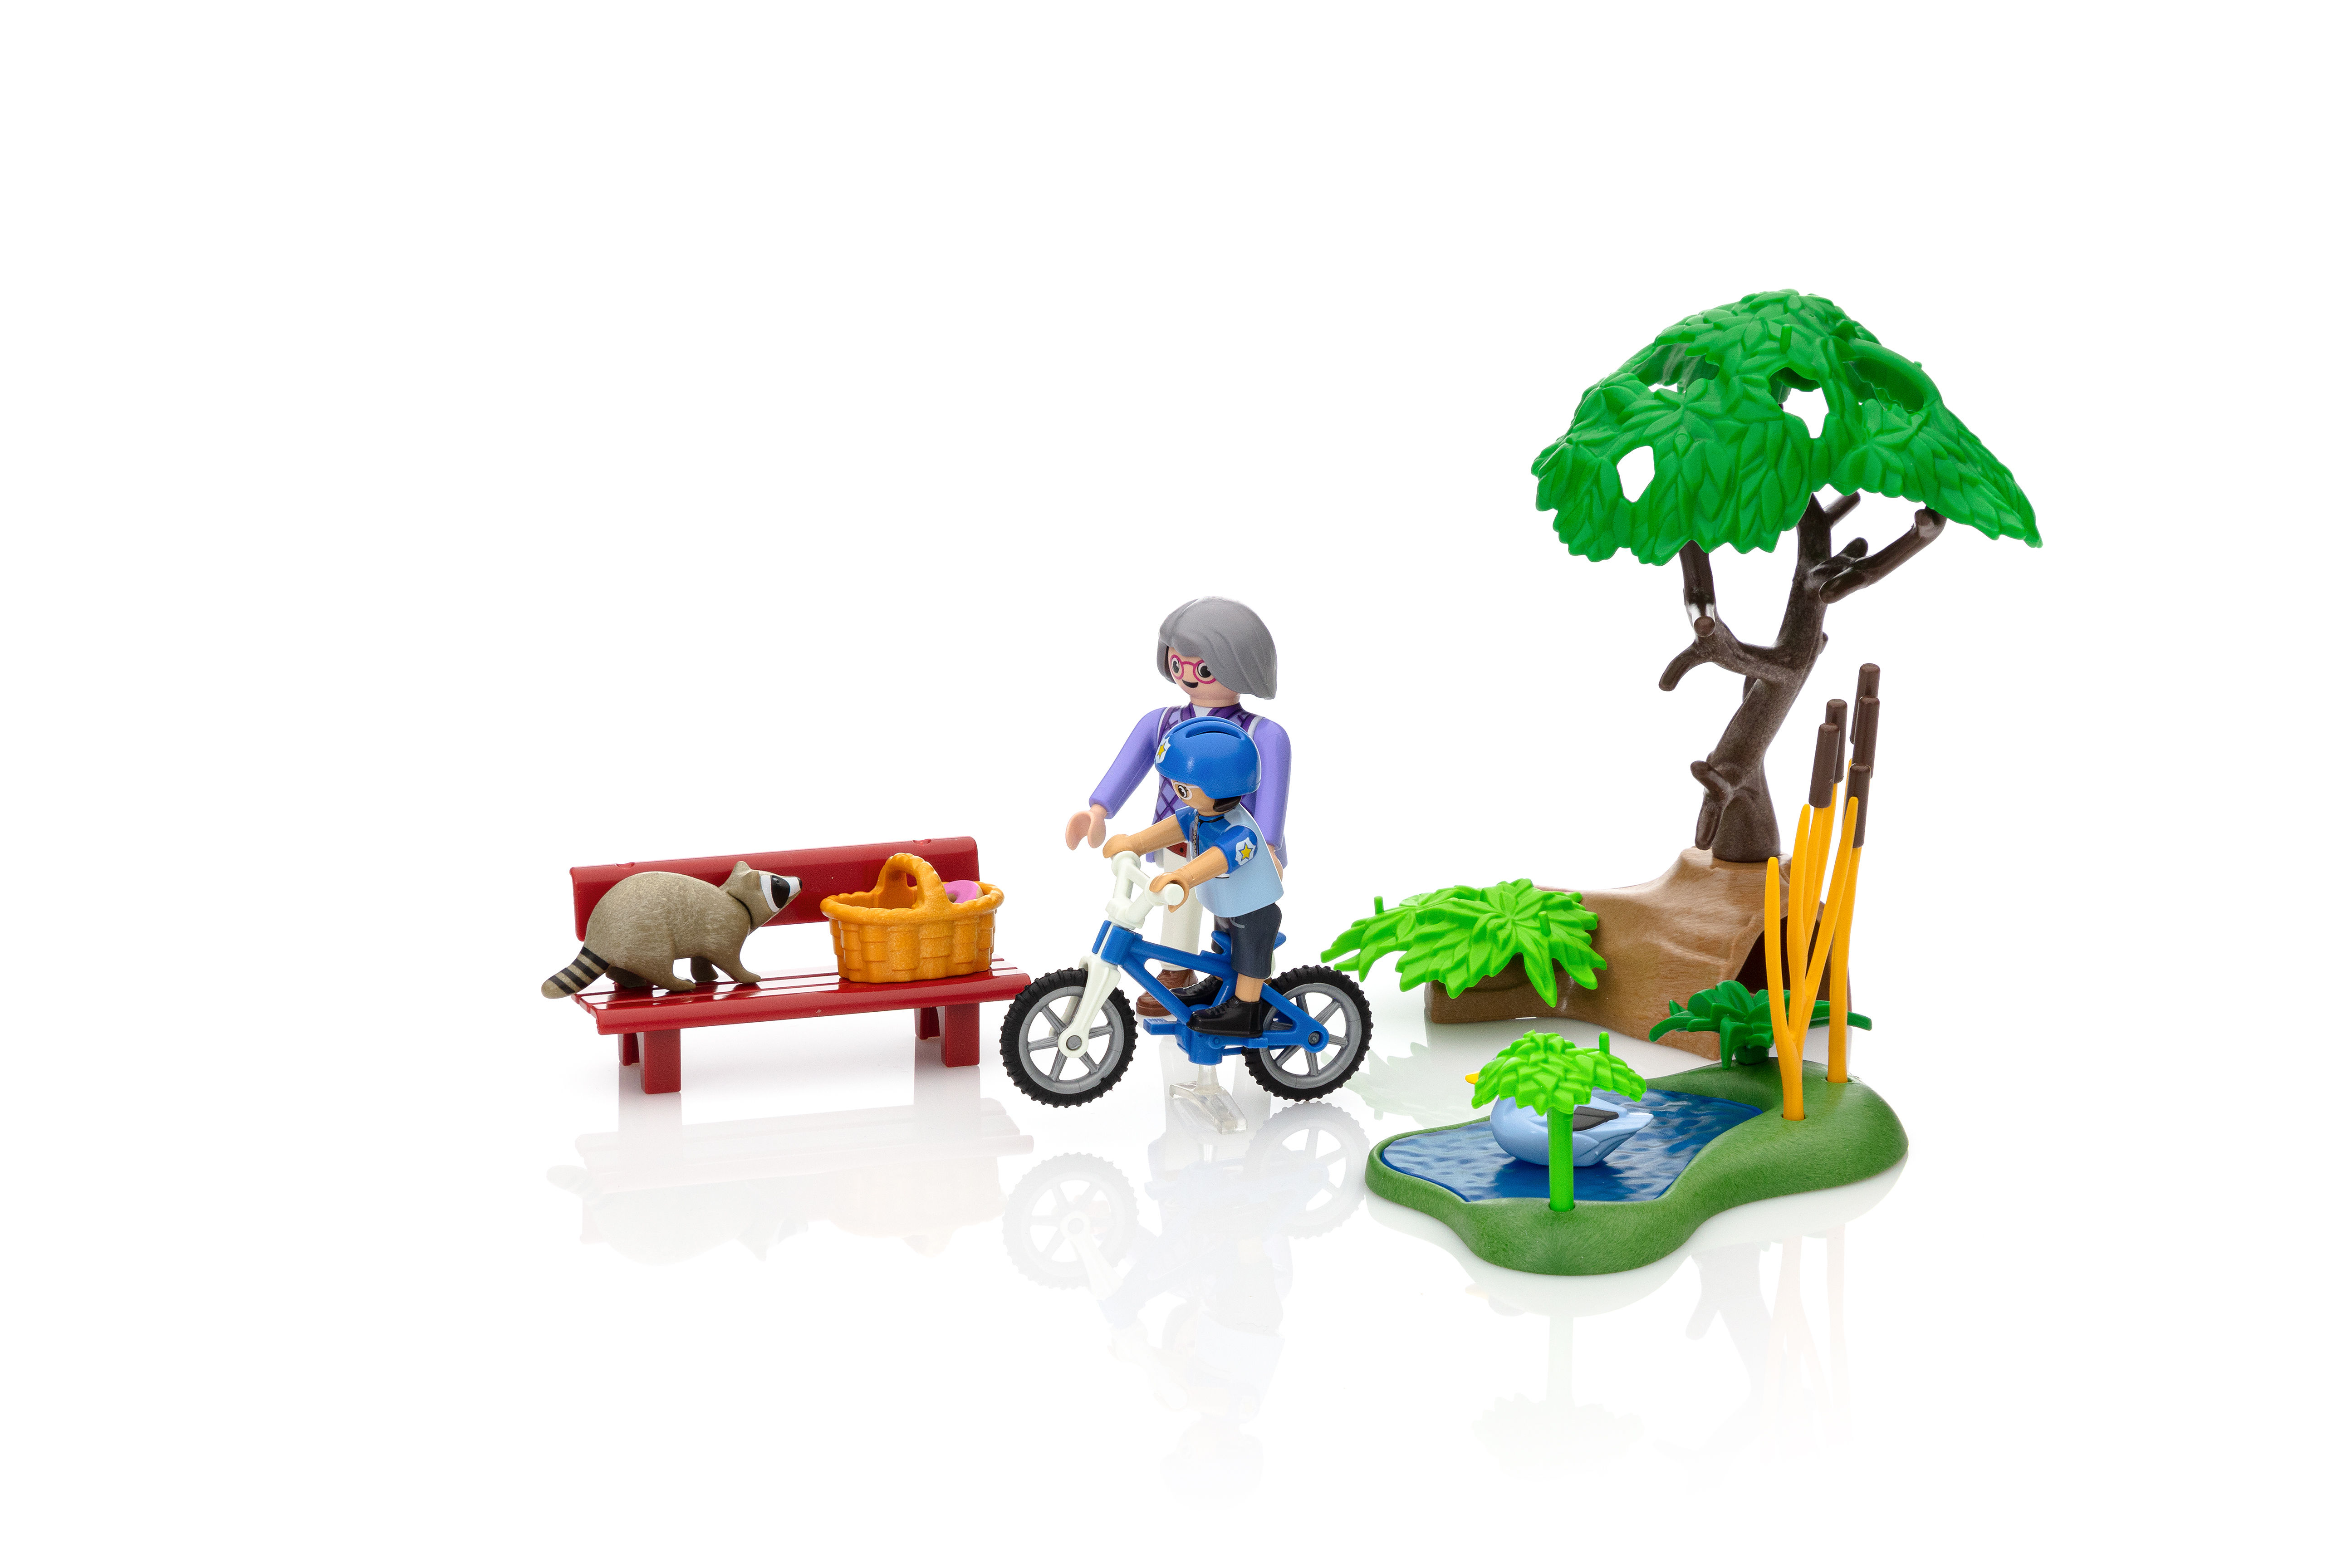 Duck On Call - Police Truck - Playmobil – The Red Balloon Toy Store